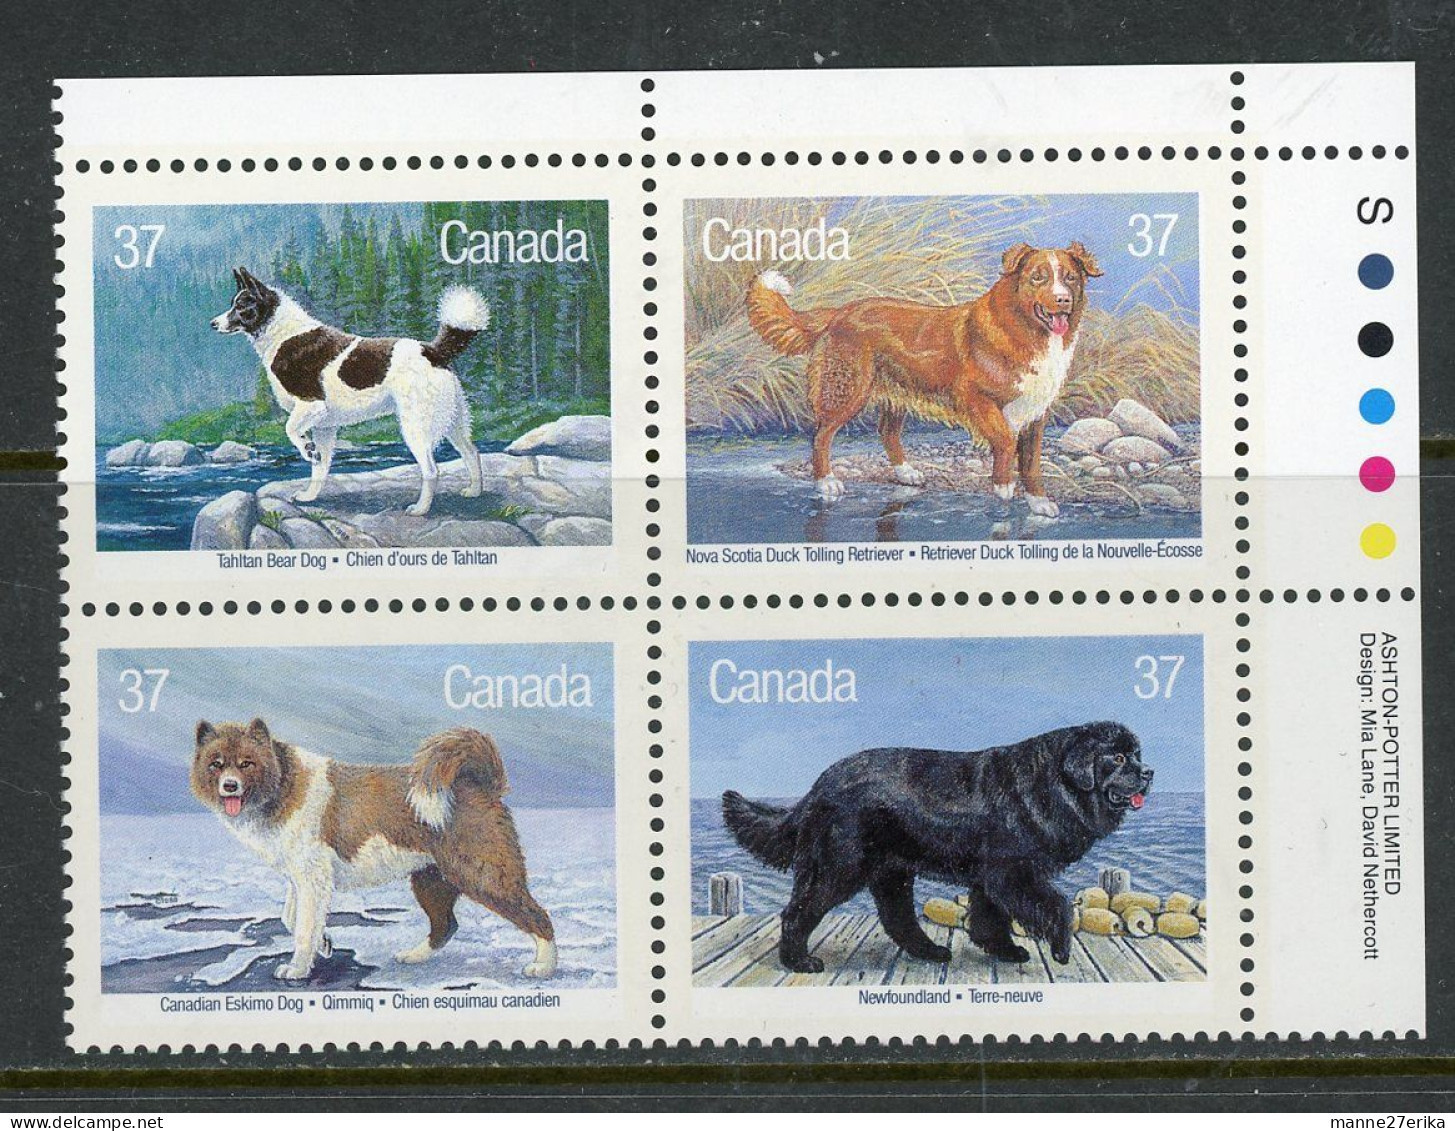 Canada 1988 MNH Plate Block  "Dogs Of Canada" - Unused Stamps